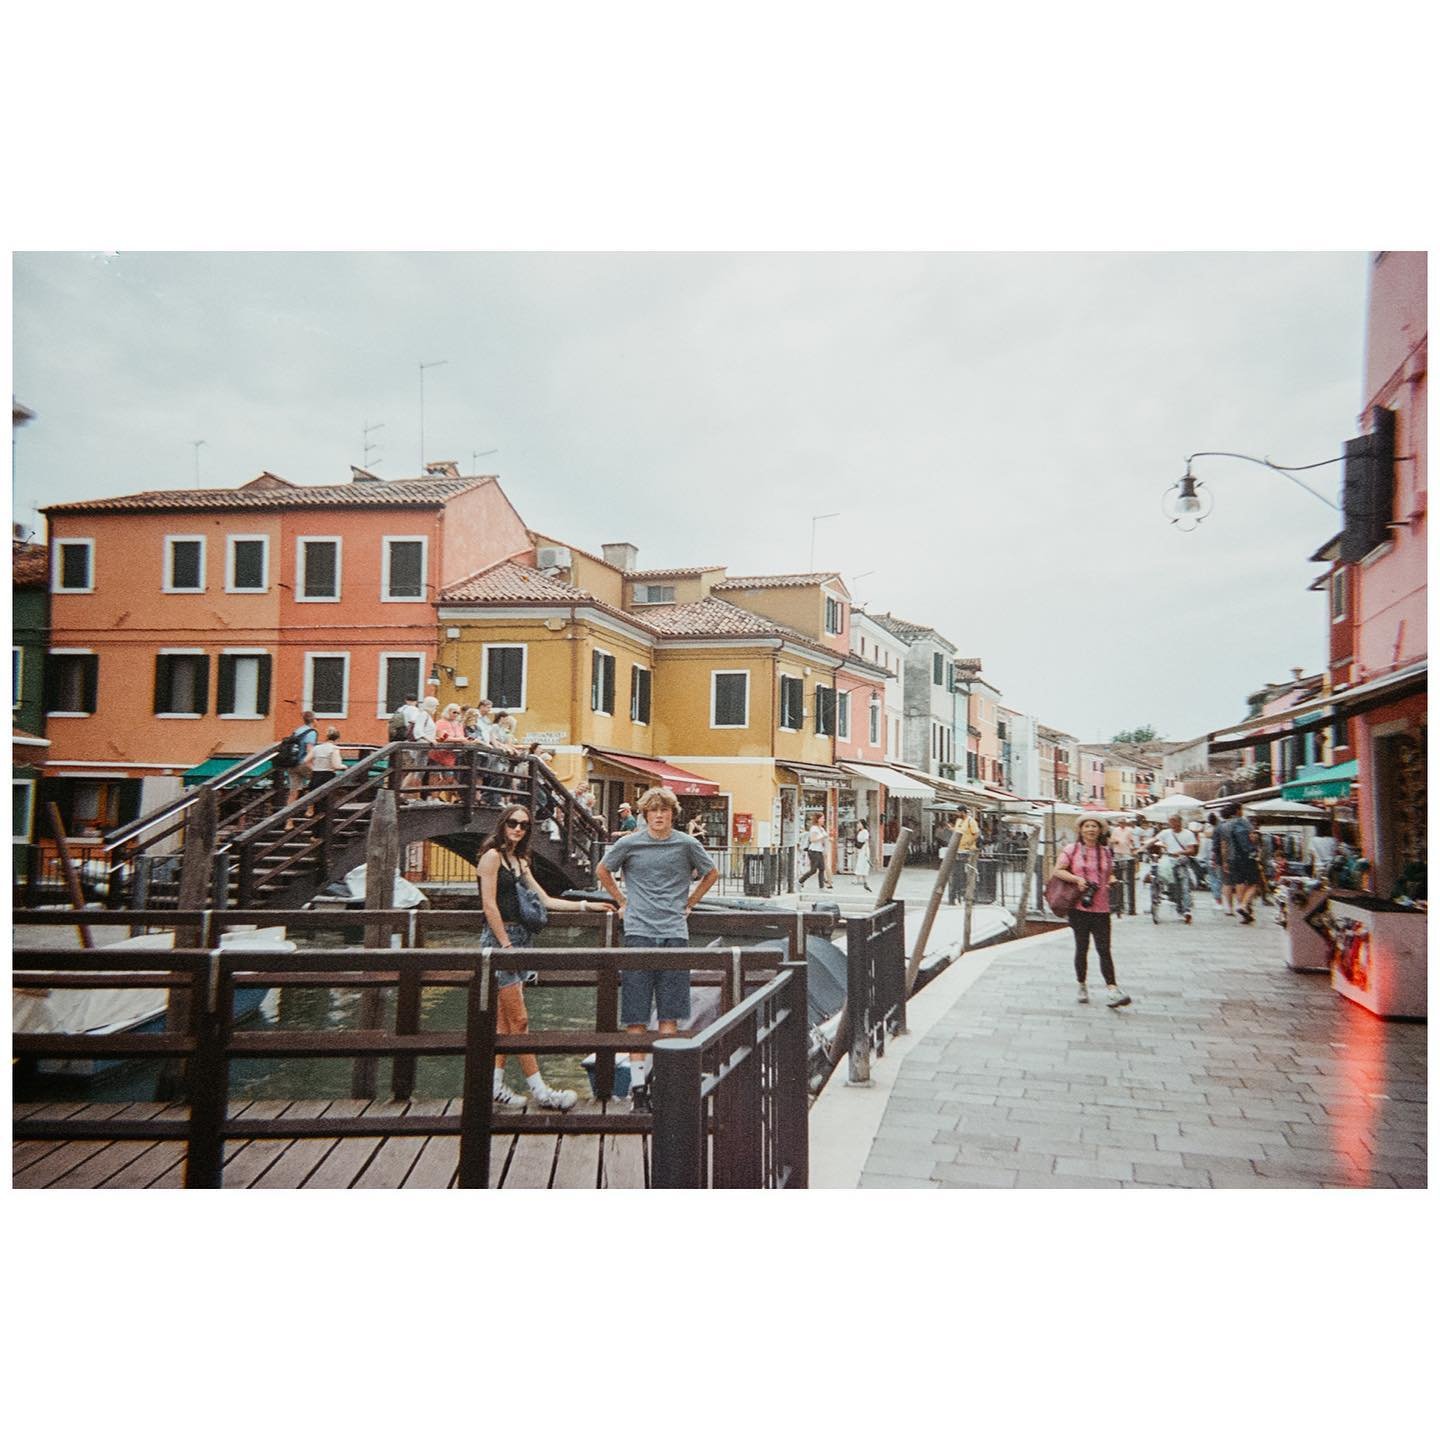 .
our bright, hot italian summer on disposable cameras ✈︎ &hearts;︎
1. drake on the airpods 
2. ghosts on a bike // love is in the air and also fingers 
3. tiny vessels and turquoise 
4. today i got stepped on by a tourist from canada 
5. small itali